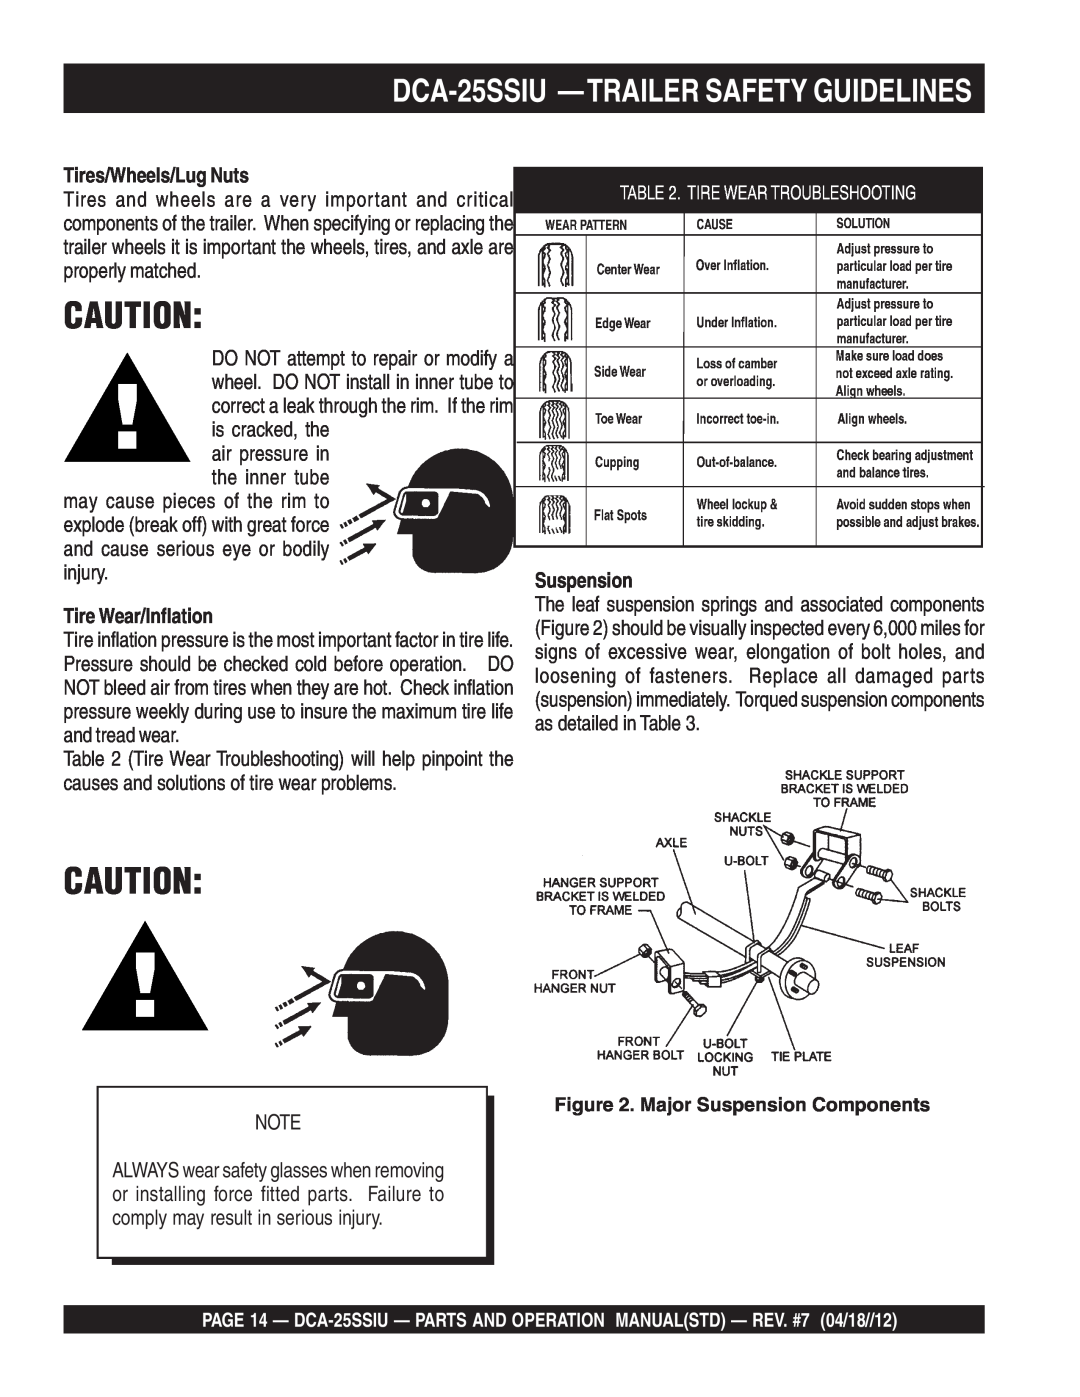 Multiquip DCA25SSIU manual DCA-25SSIU —TRAILERSAFETY GUIDELINES, Tires/Wheels/Lug Nuts, Tire Wear/Inflation, Suspension 